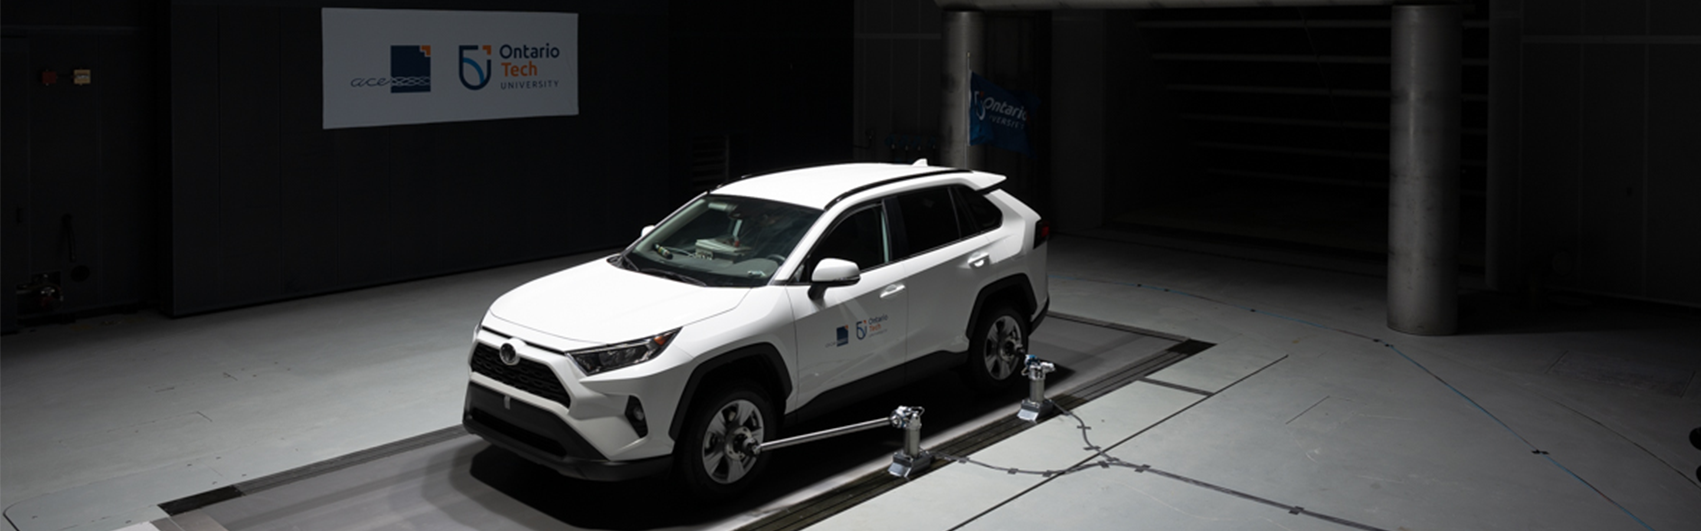 RAV4 in Climatic Aerodynamic Wind Tunnel on Moving Ground Plane